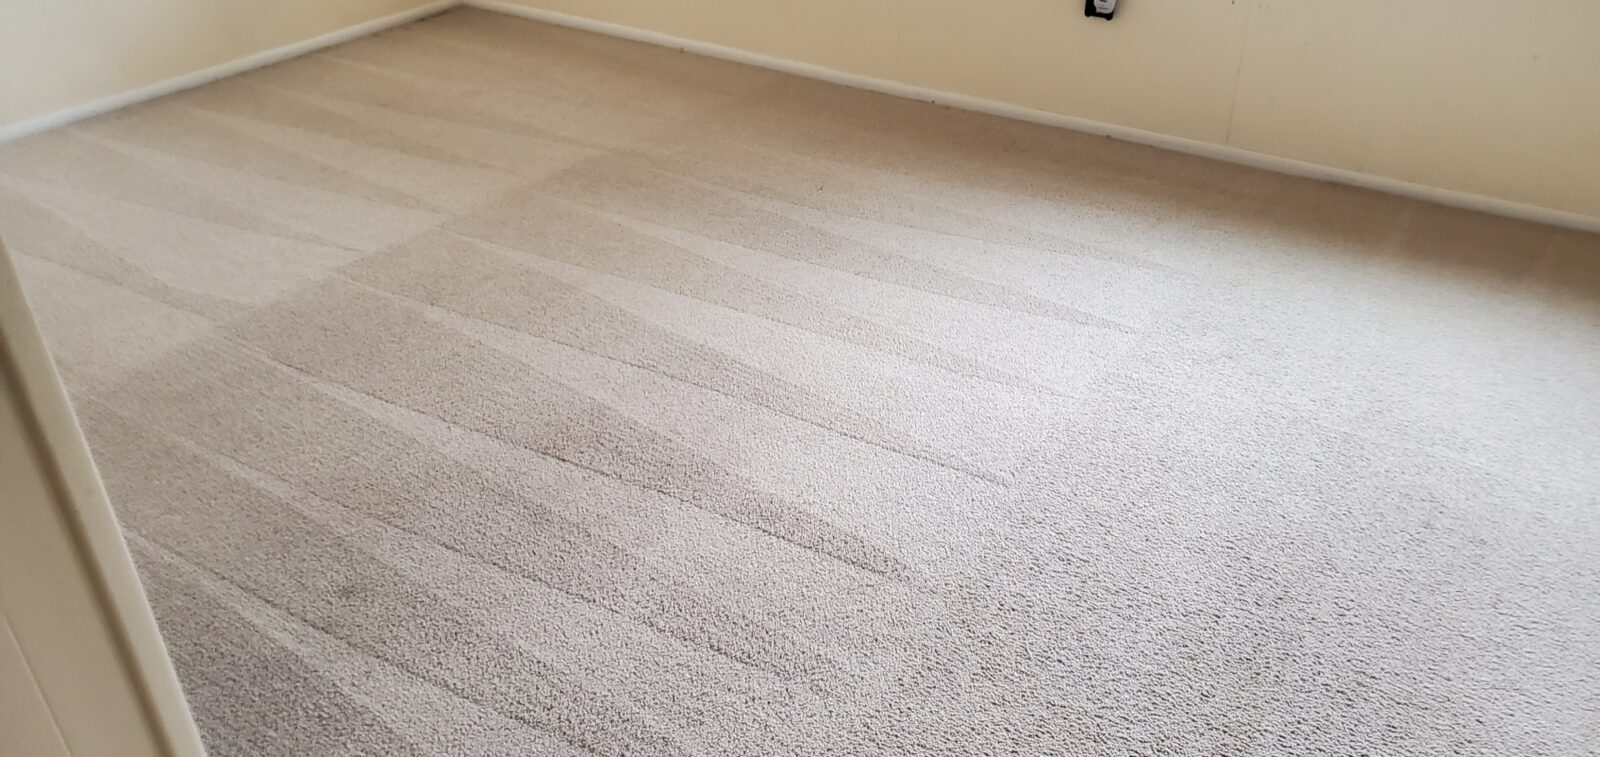 Dry Carpet Cleaning Near Me